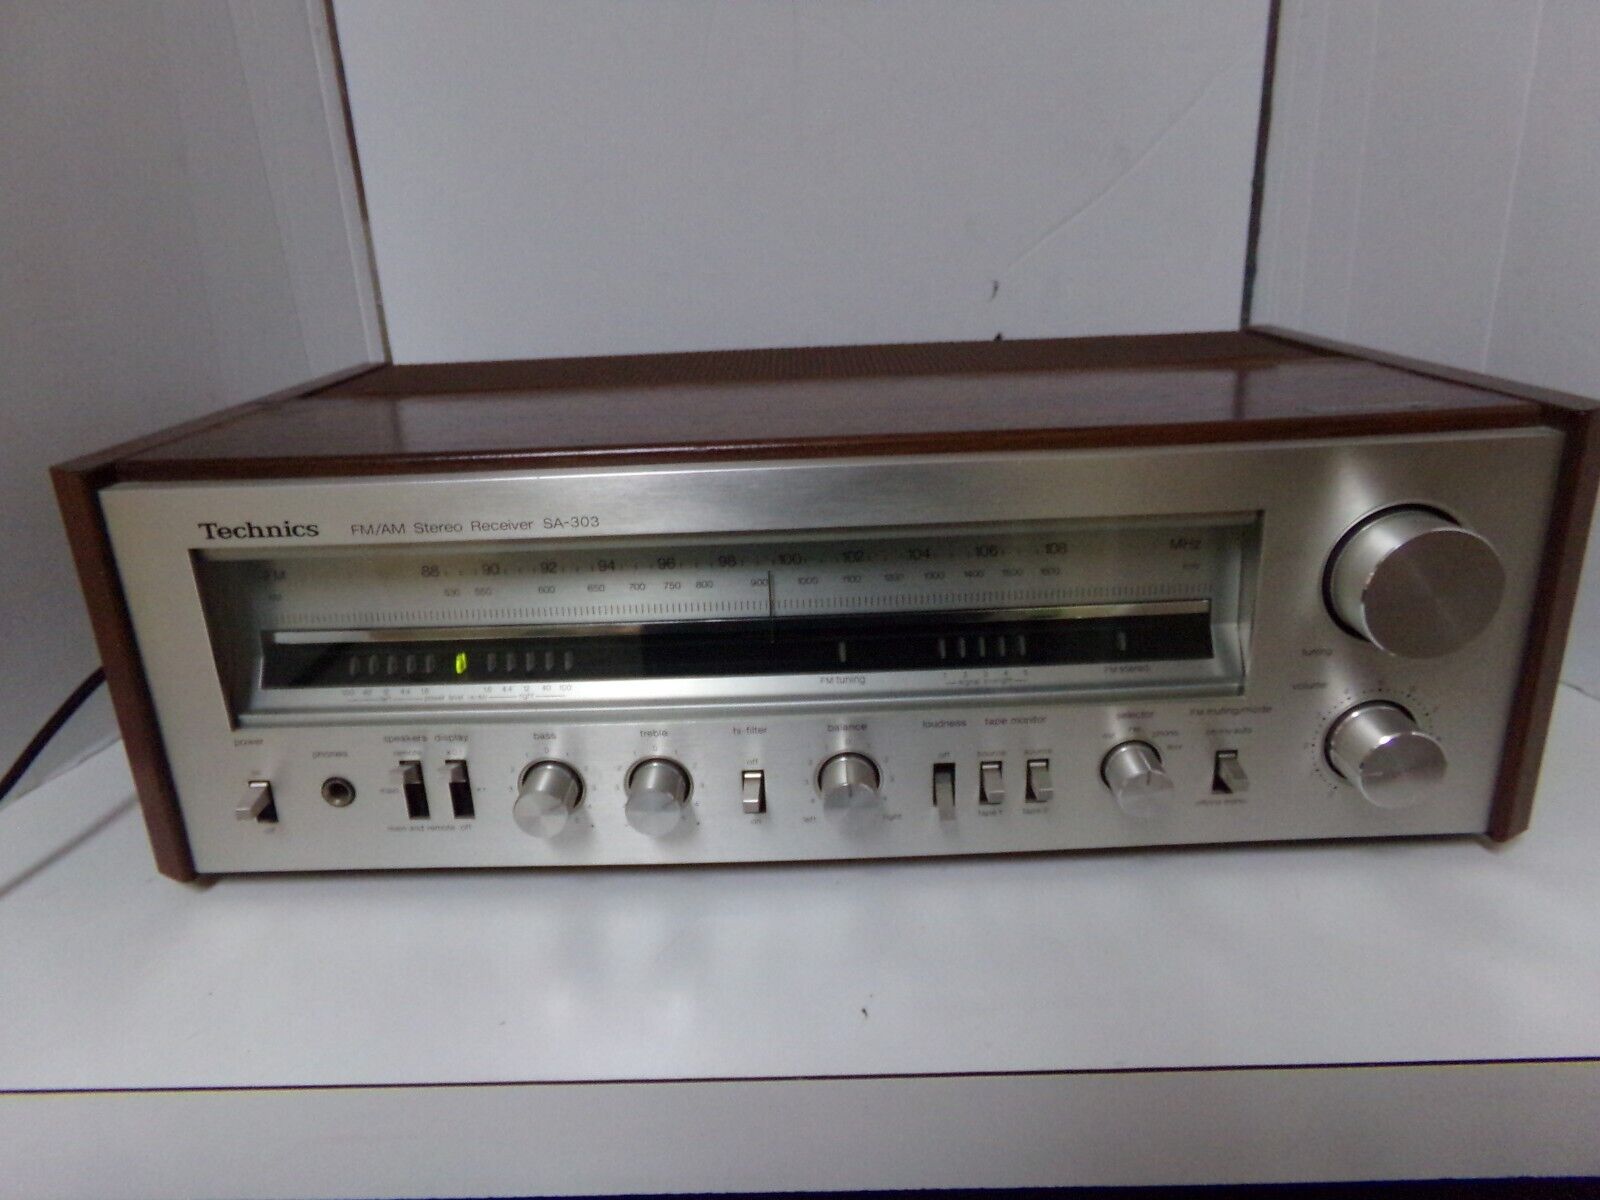 Vintage 1970s TECHNICS Stereo Receiver SA-303 Made in Japan